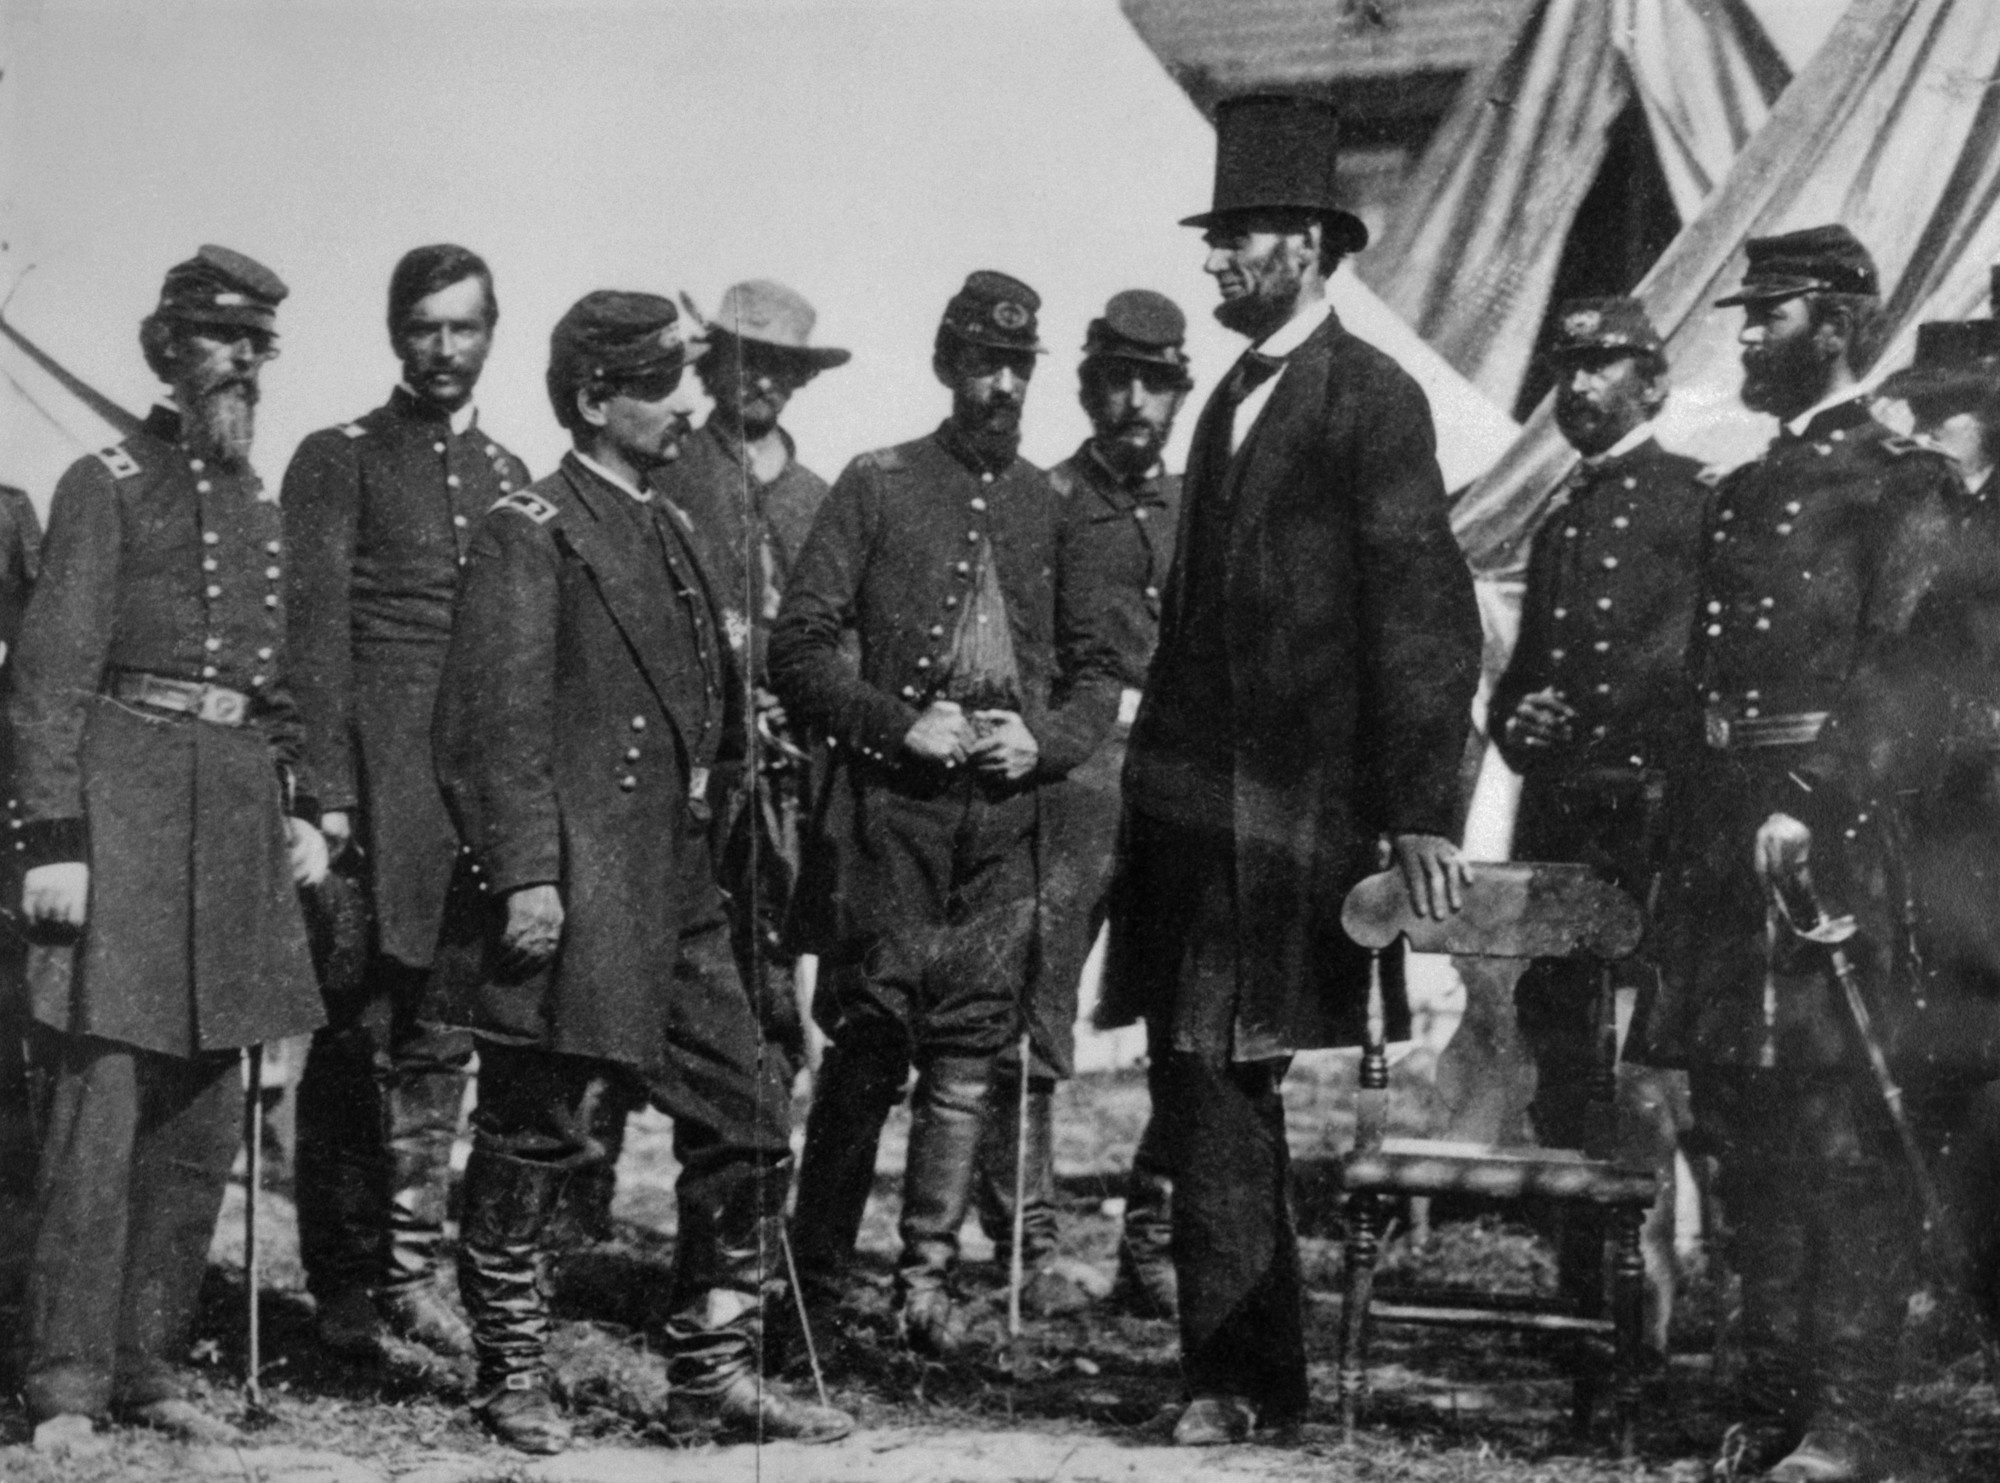 Given this year's deeply controversial presidential election, it might surprise you to learn who the first Republican president of the U.S. was.
The Republicans didn't come to power from the very beginning. In fact, it wasn't until Abraham Lincoln, became the 16th president of the U.S. that Republicans finally had a voice.